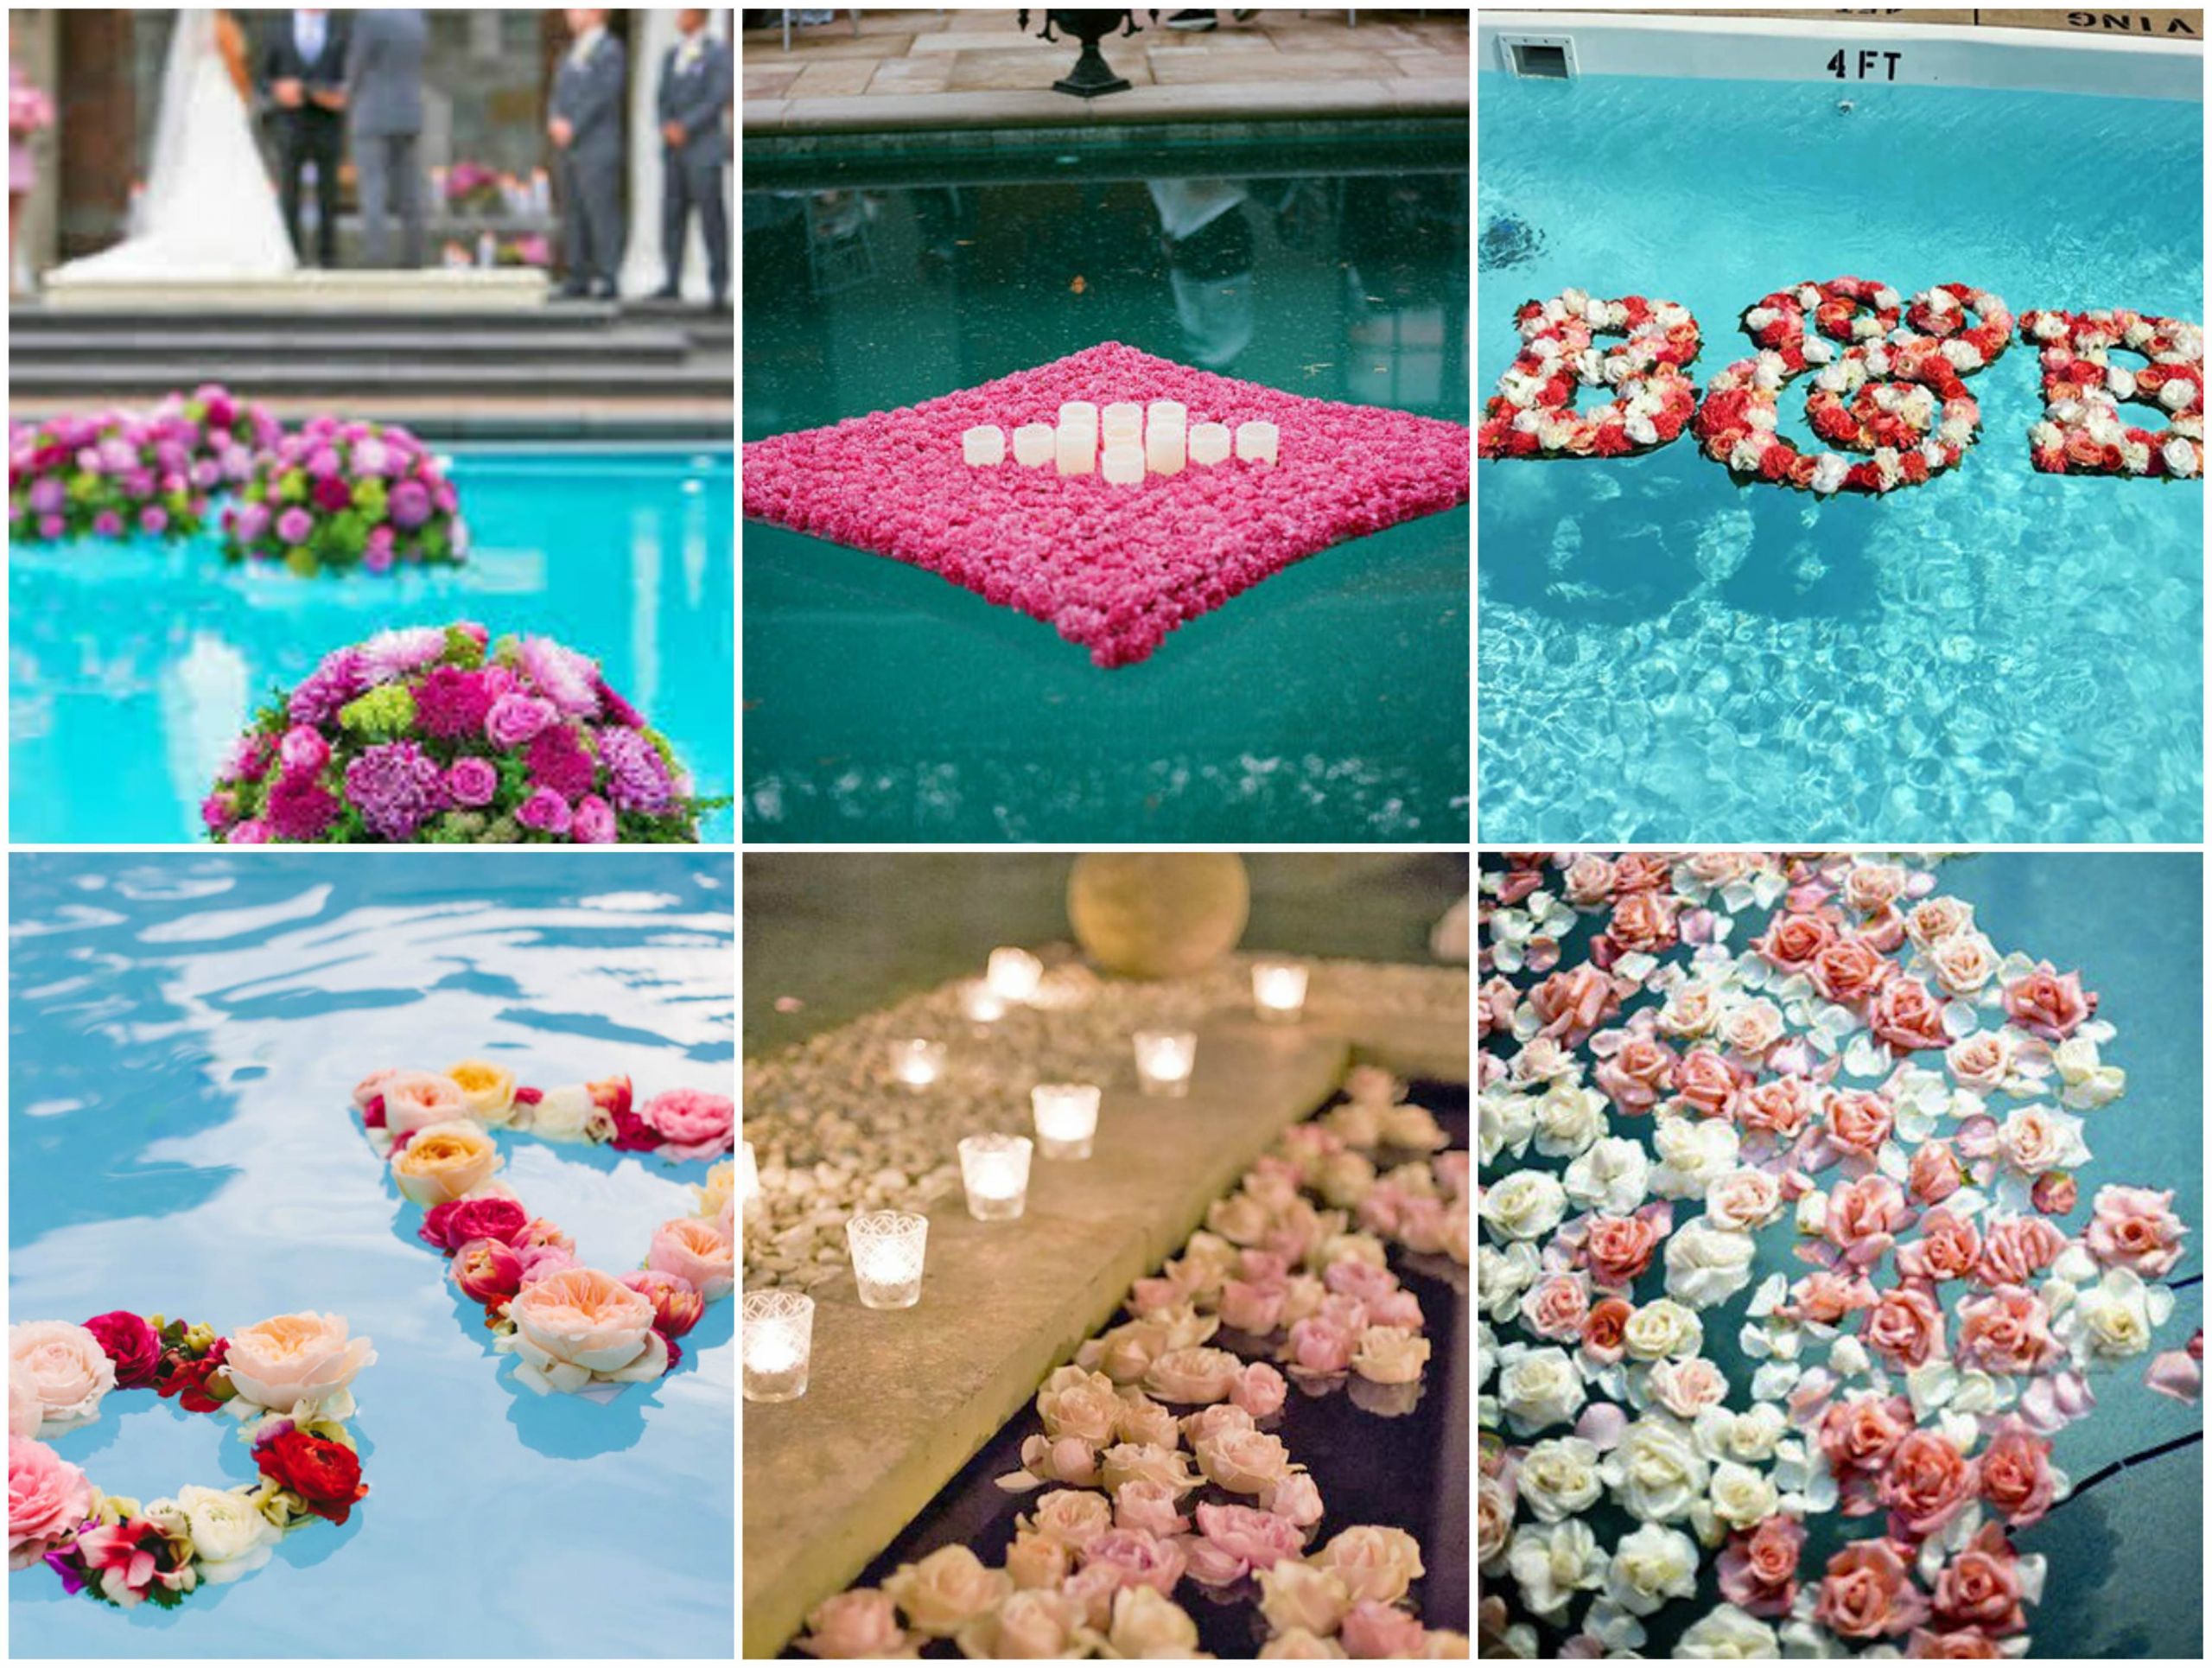 Poolside Party Decoration Ideas
 Top Poolside Decor Ideas For Your Wedding Pool Party